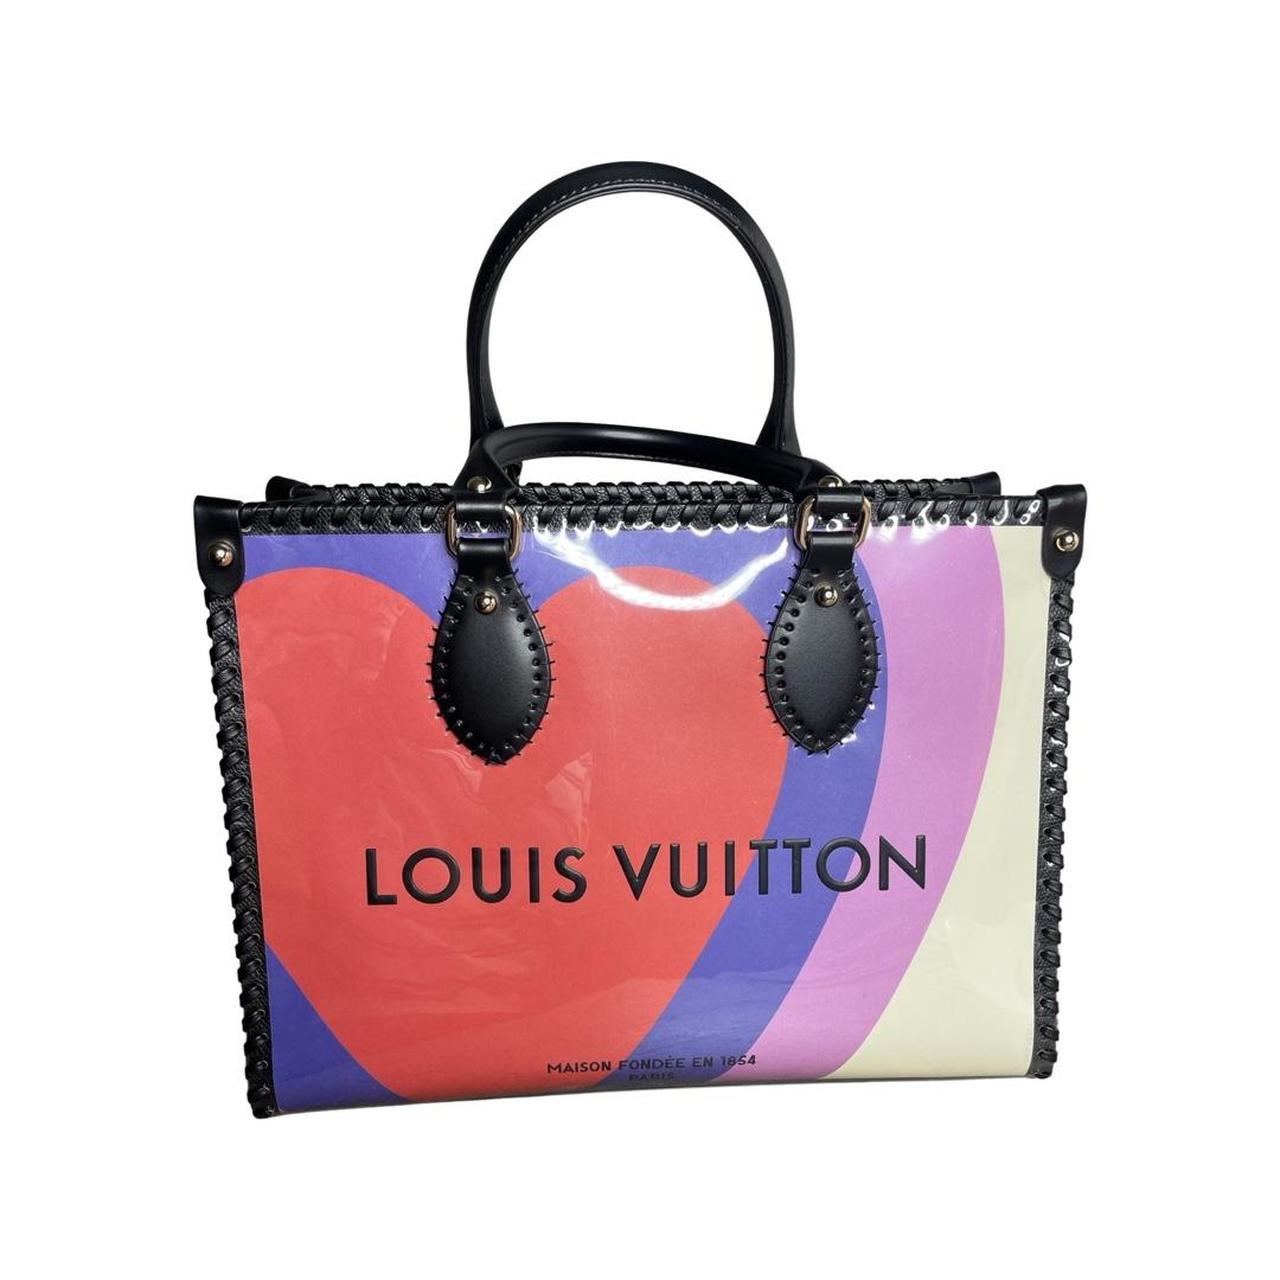 Louis Vuitton tote bag from the 'Dream' exhibition - Depop